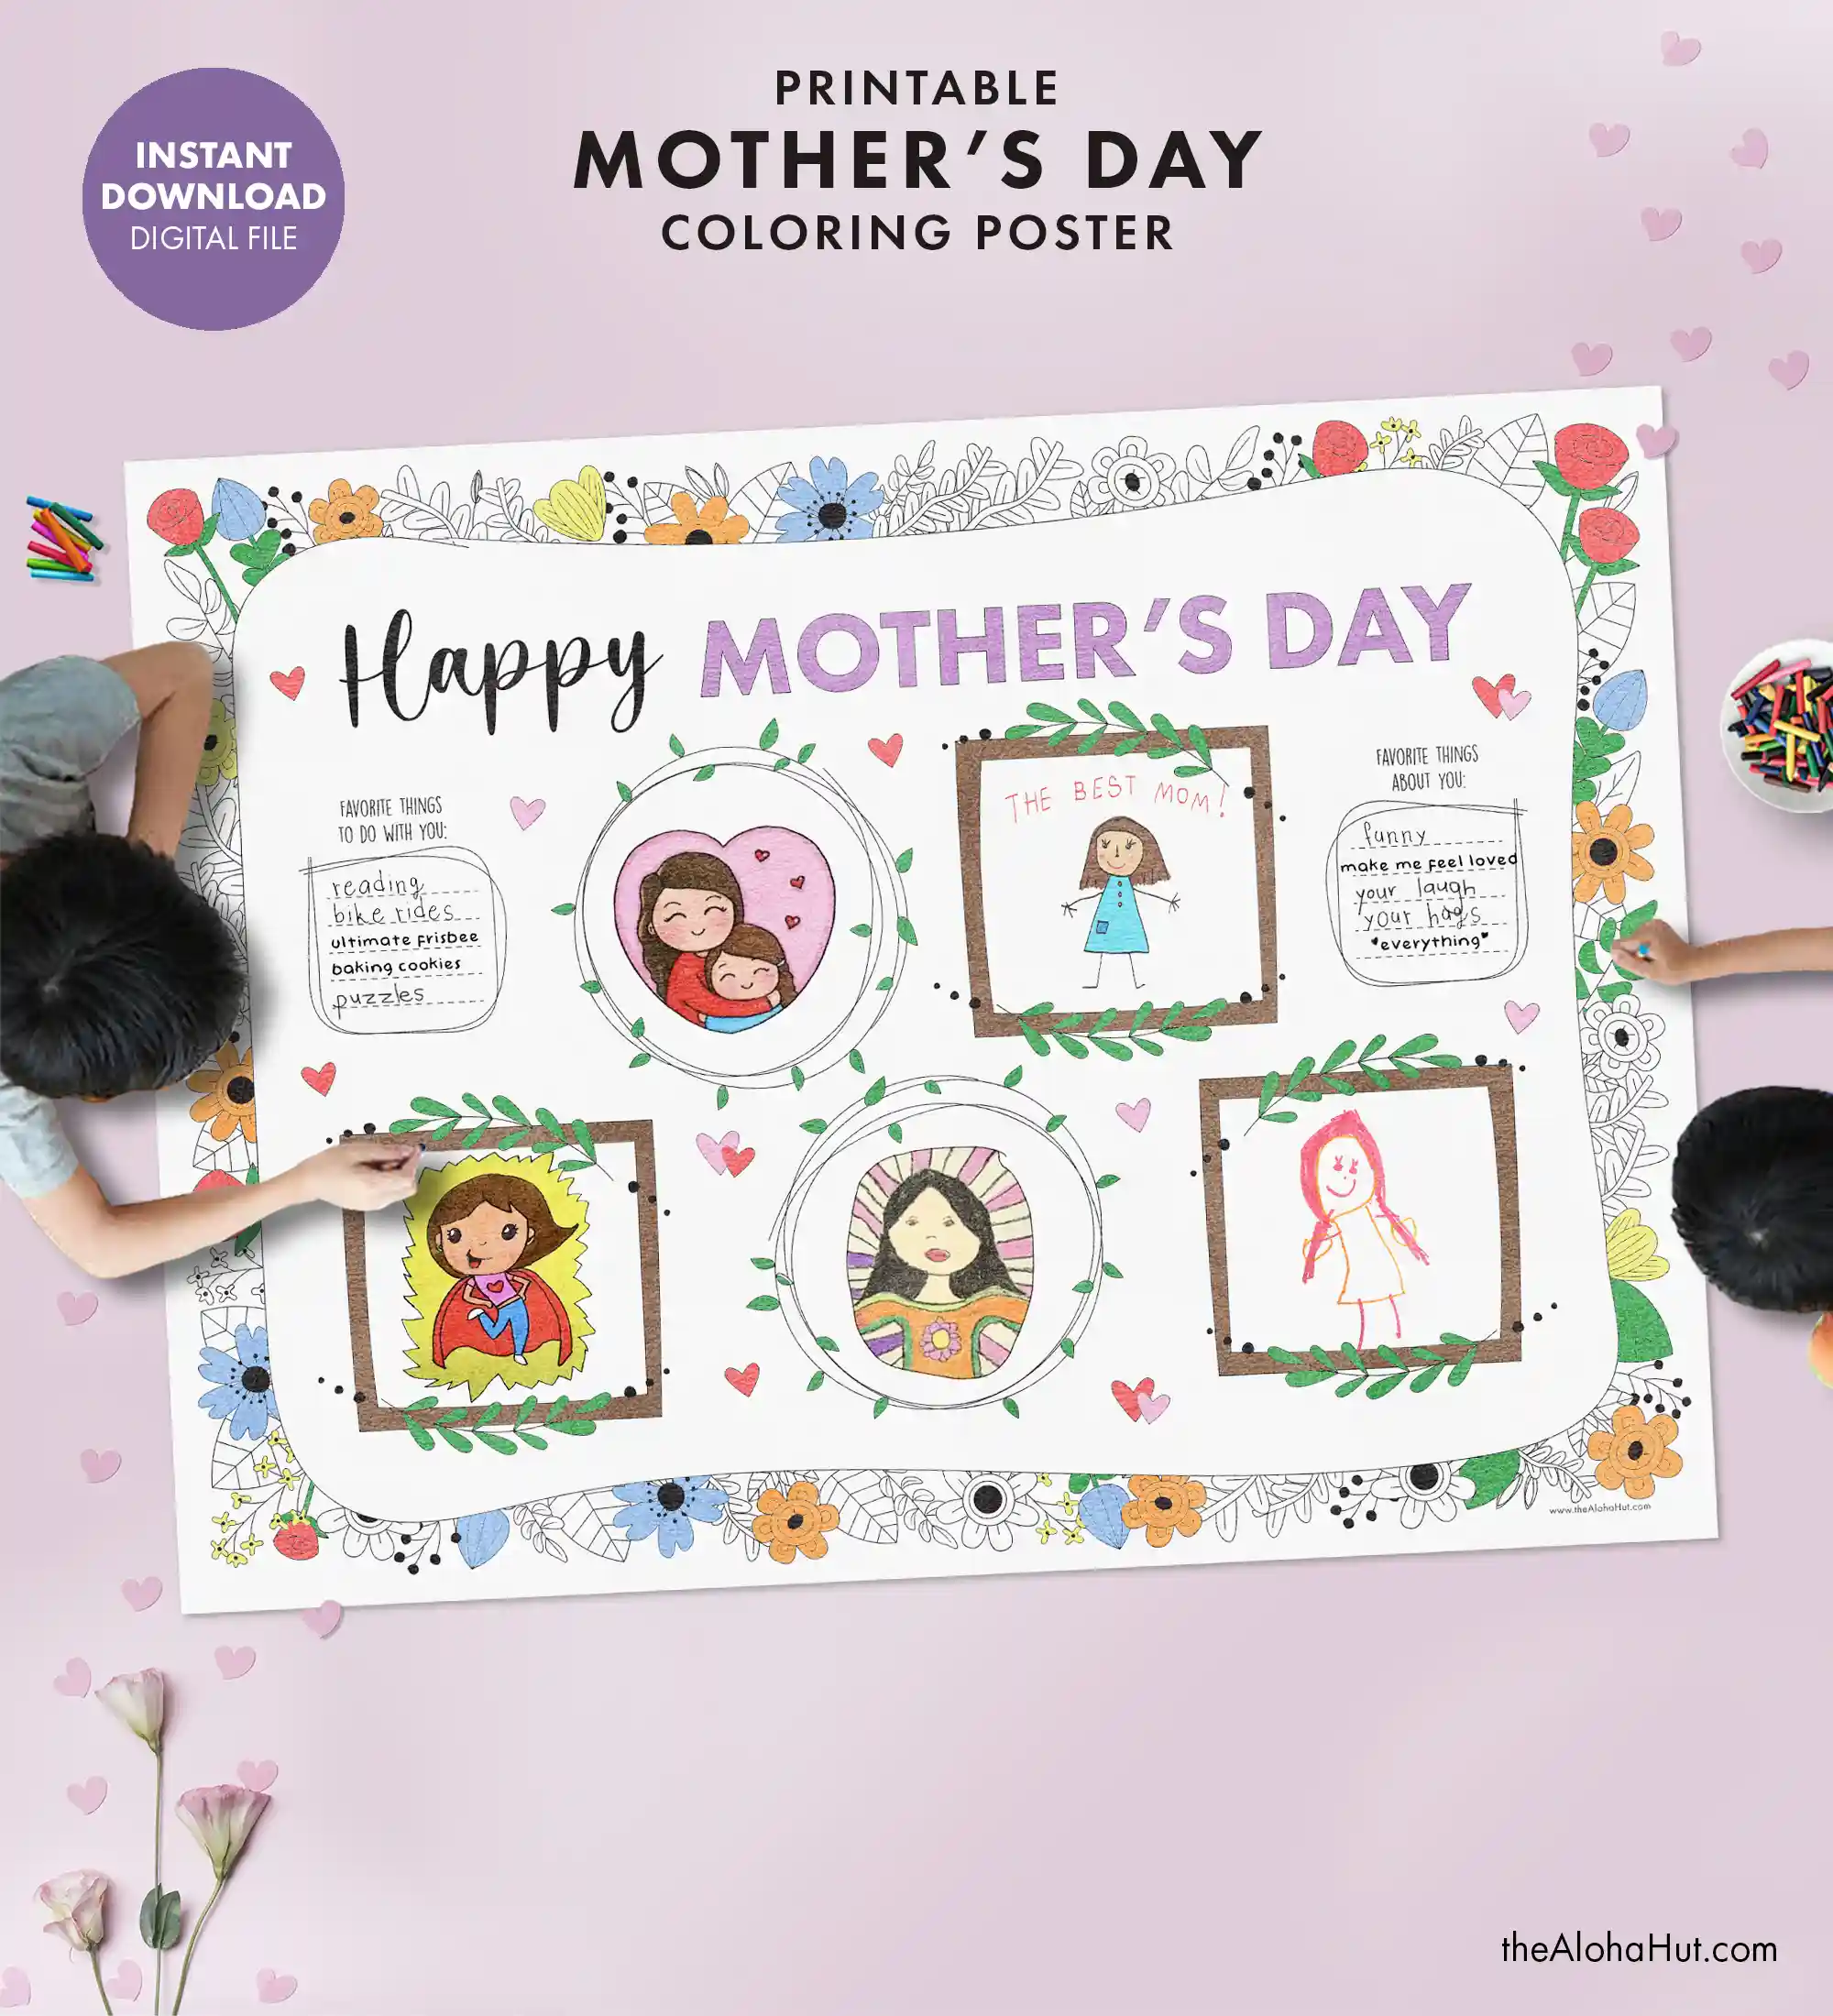 Giant Mother's Day poster and art activity for the kids. Give mom a sentimental and simple gift this year by drawing pictures of her and giving her a giant Mother's Day card. The kids will love creating this fun and easy gift for mom (or grandma!). Download the 36x48" blueprint poster, print, and let the kids draw and color the page for the best gift idea for mom and grandma this year!